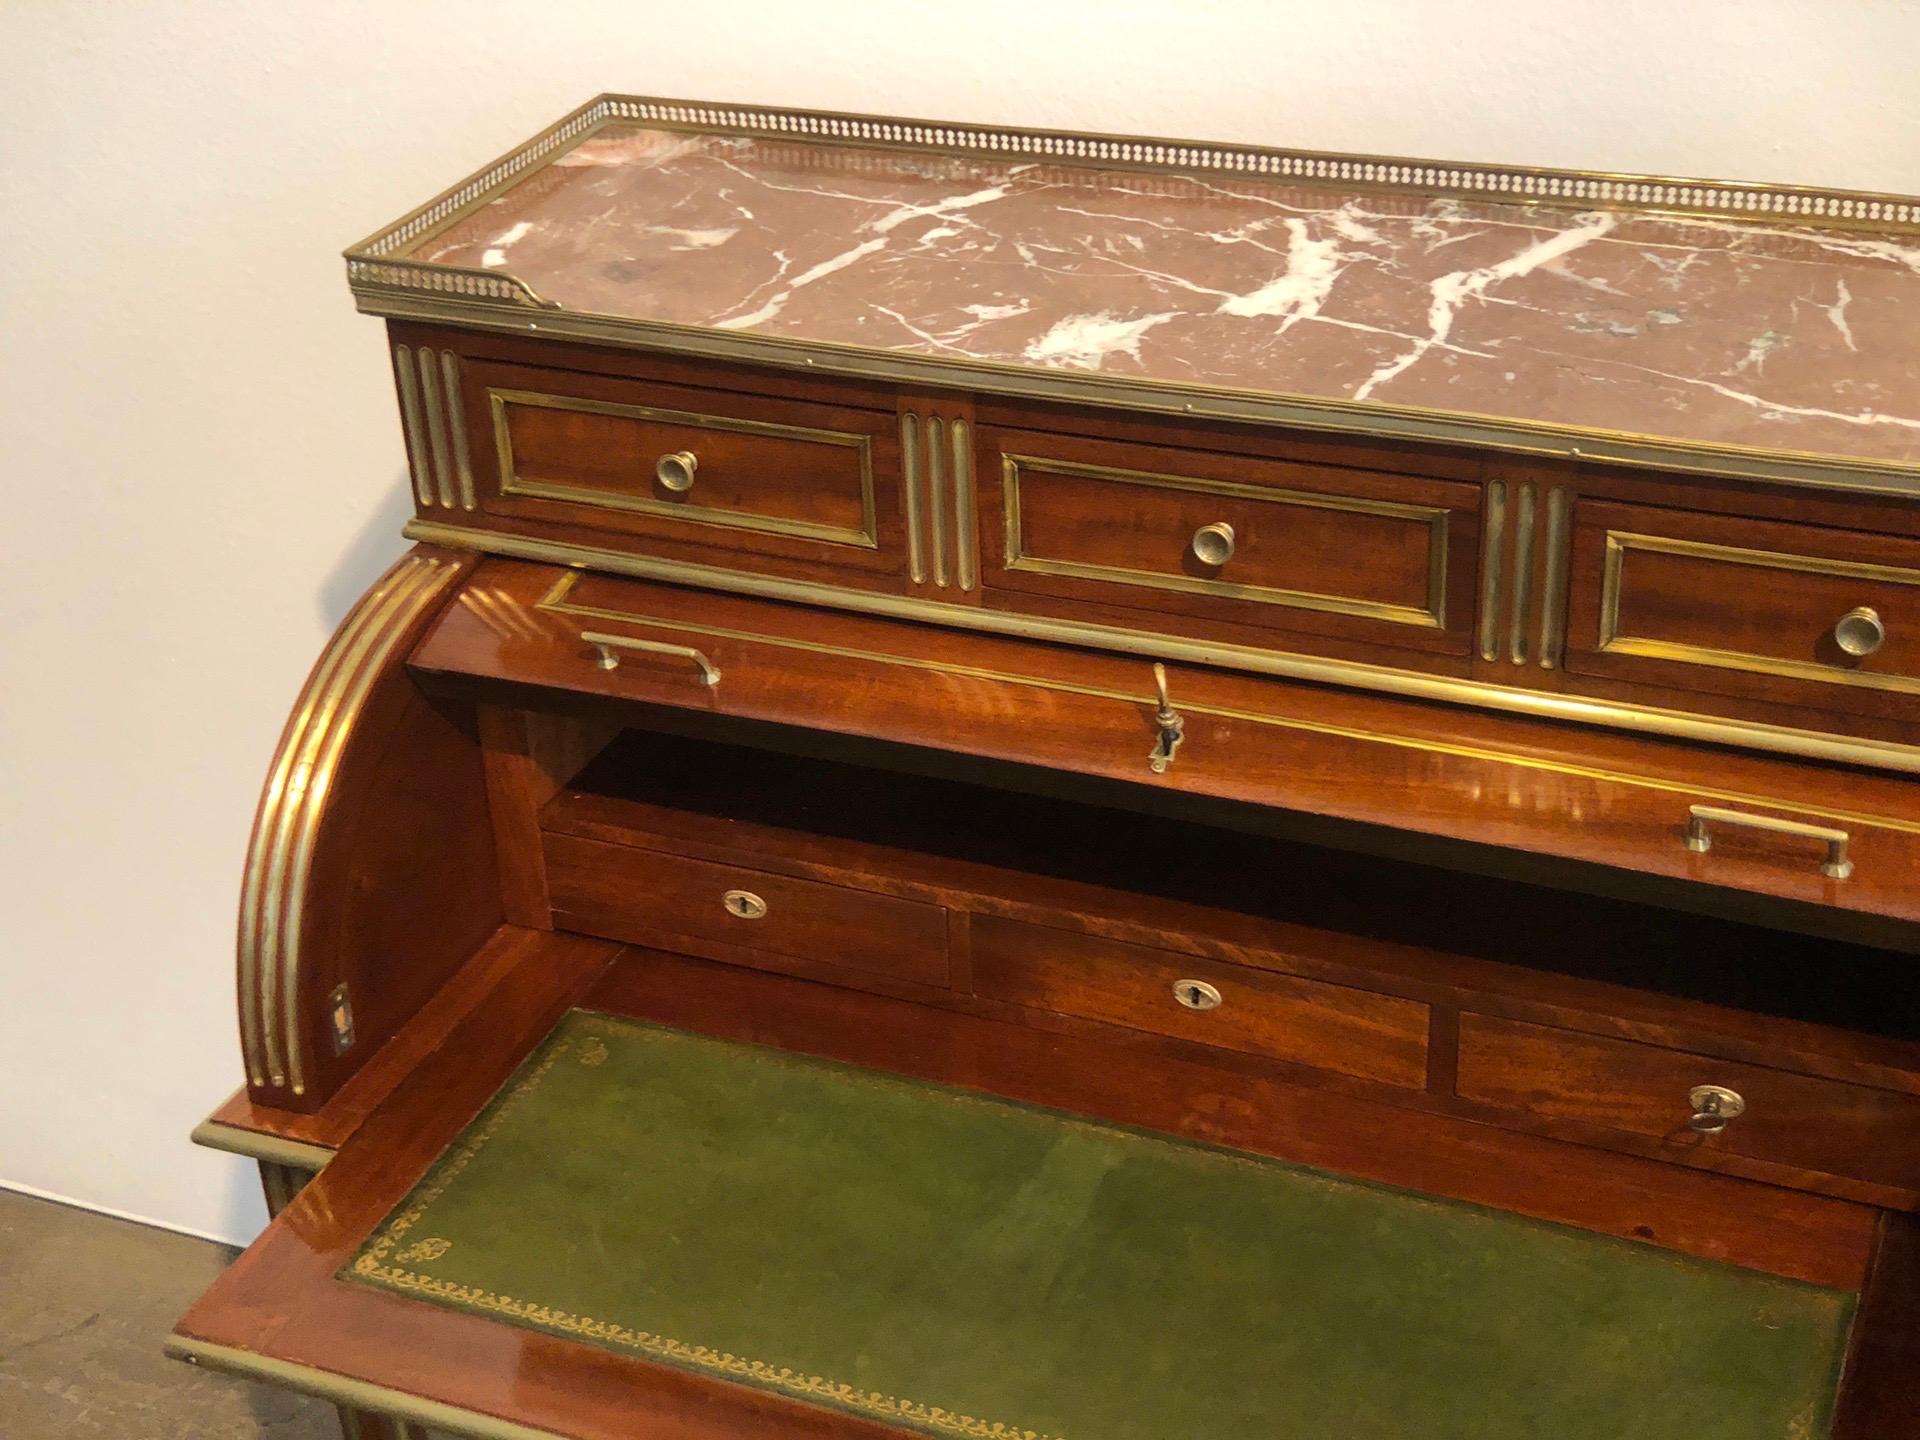 Polished Antique Late 19th Century Louis XVI Cylinder Bureau Writing Desk from France